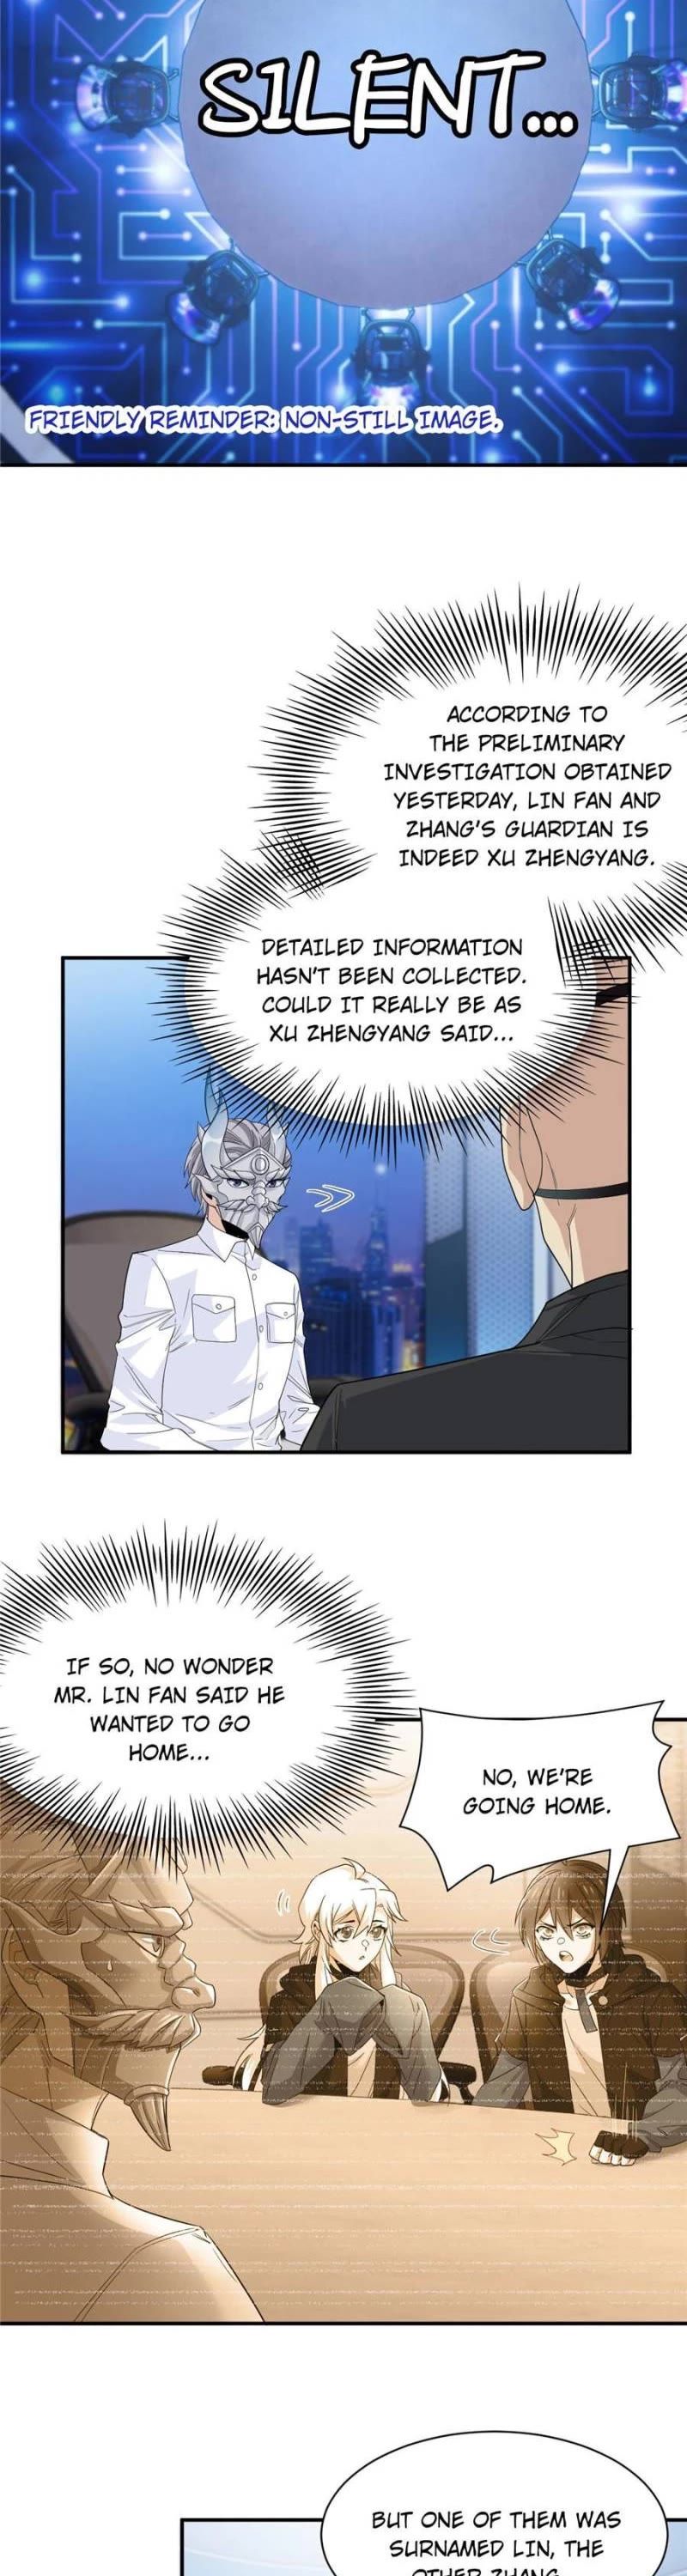 The Strong Man From The Mental Hospital Chapter 175 page 7